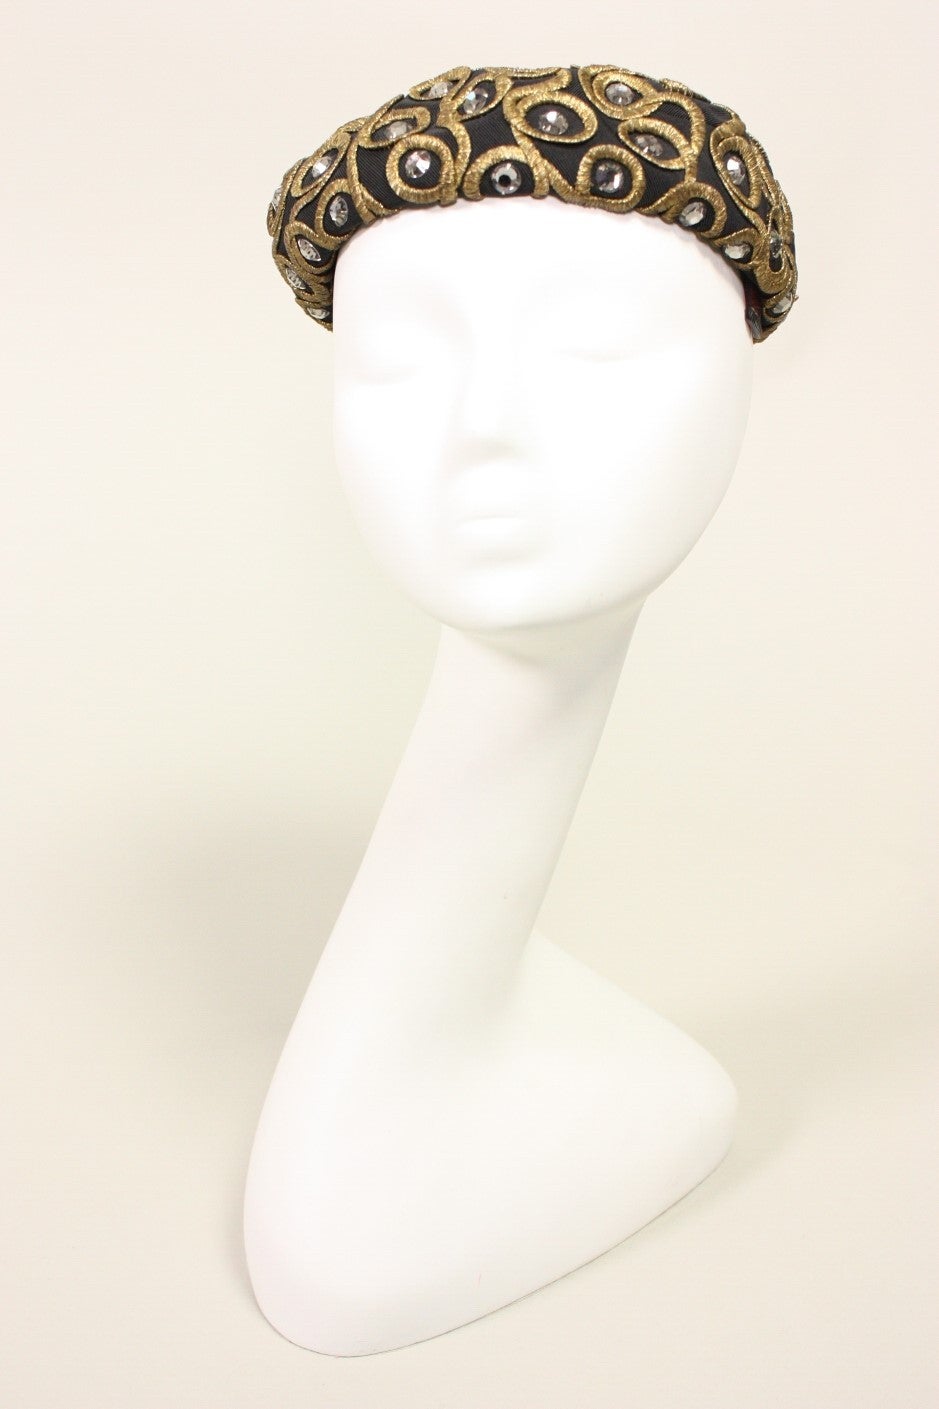 Black faille beret from Mr. John likely dates to the 1960's and is made of black faille with gold bullion and rhinestone ornamentation.

Interior Circumference: 21 1/2